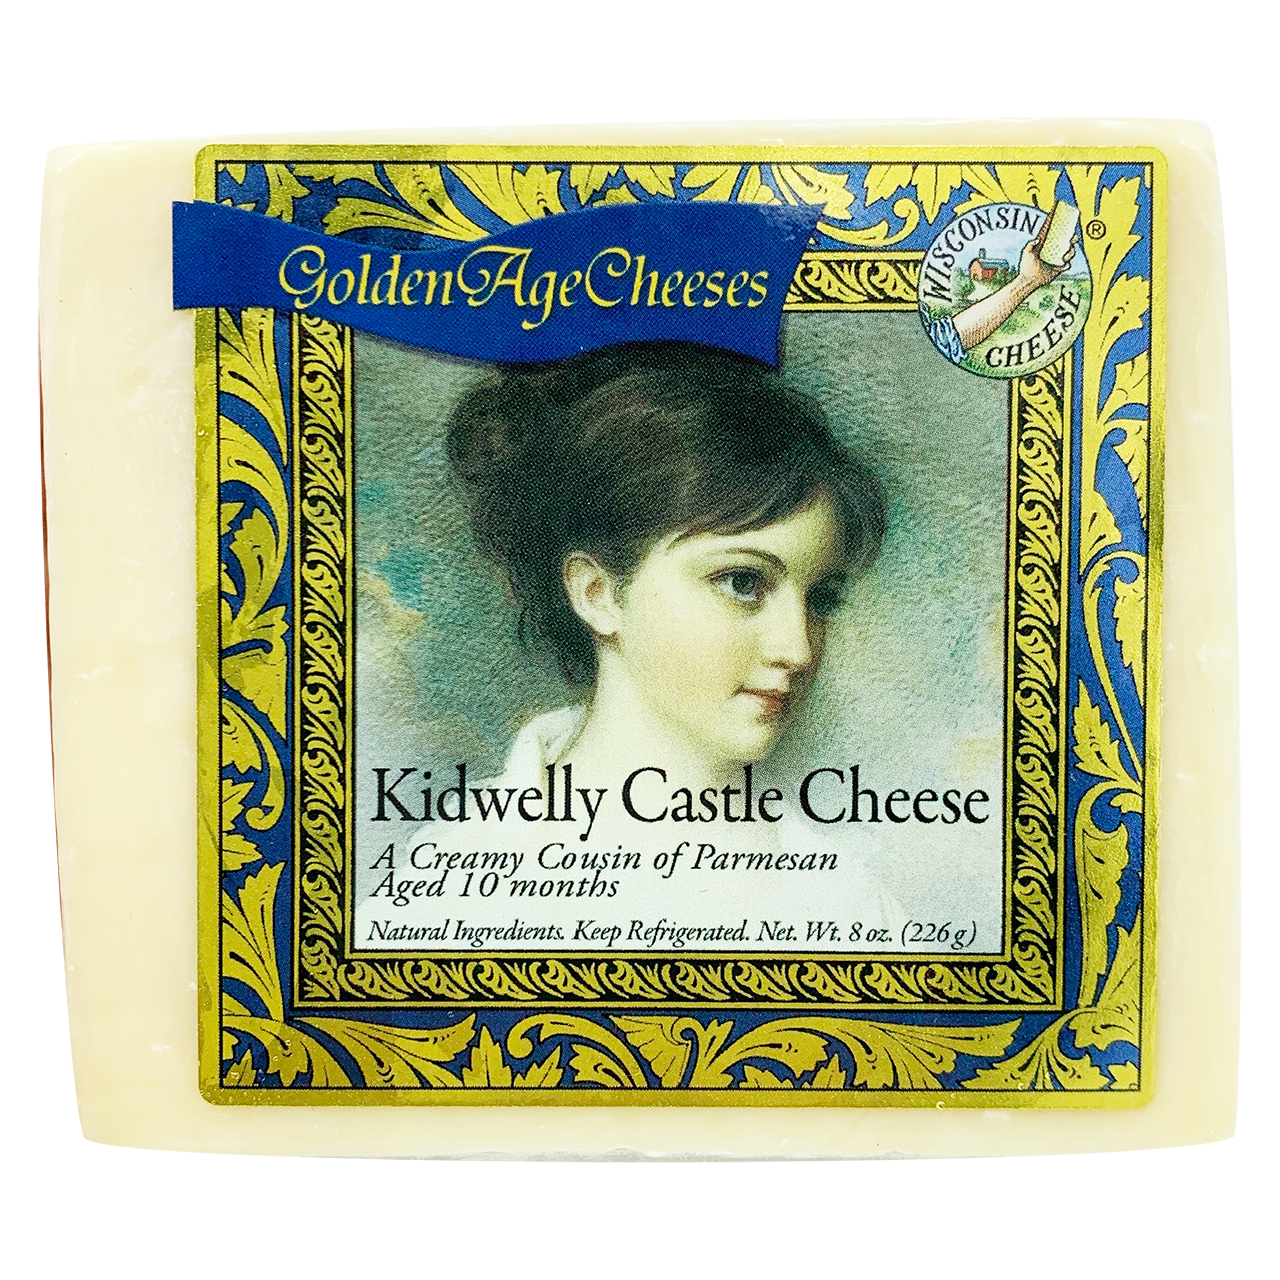 Kidwelly Castle Cheese